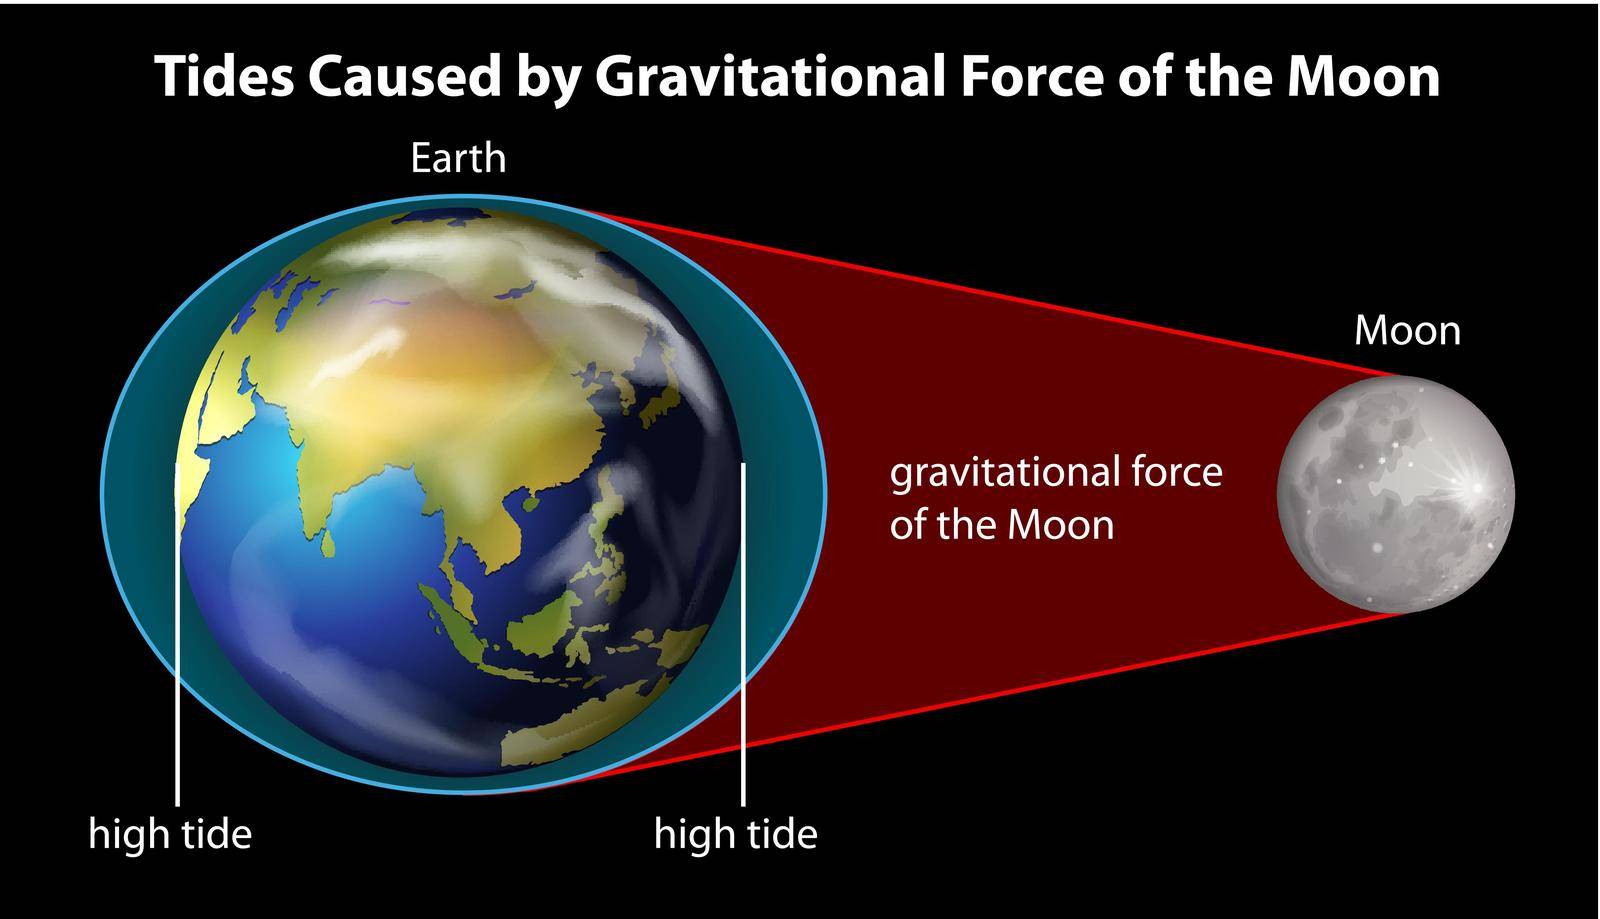 Poster explaining cause of tides by gravitational force